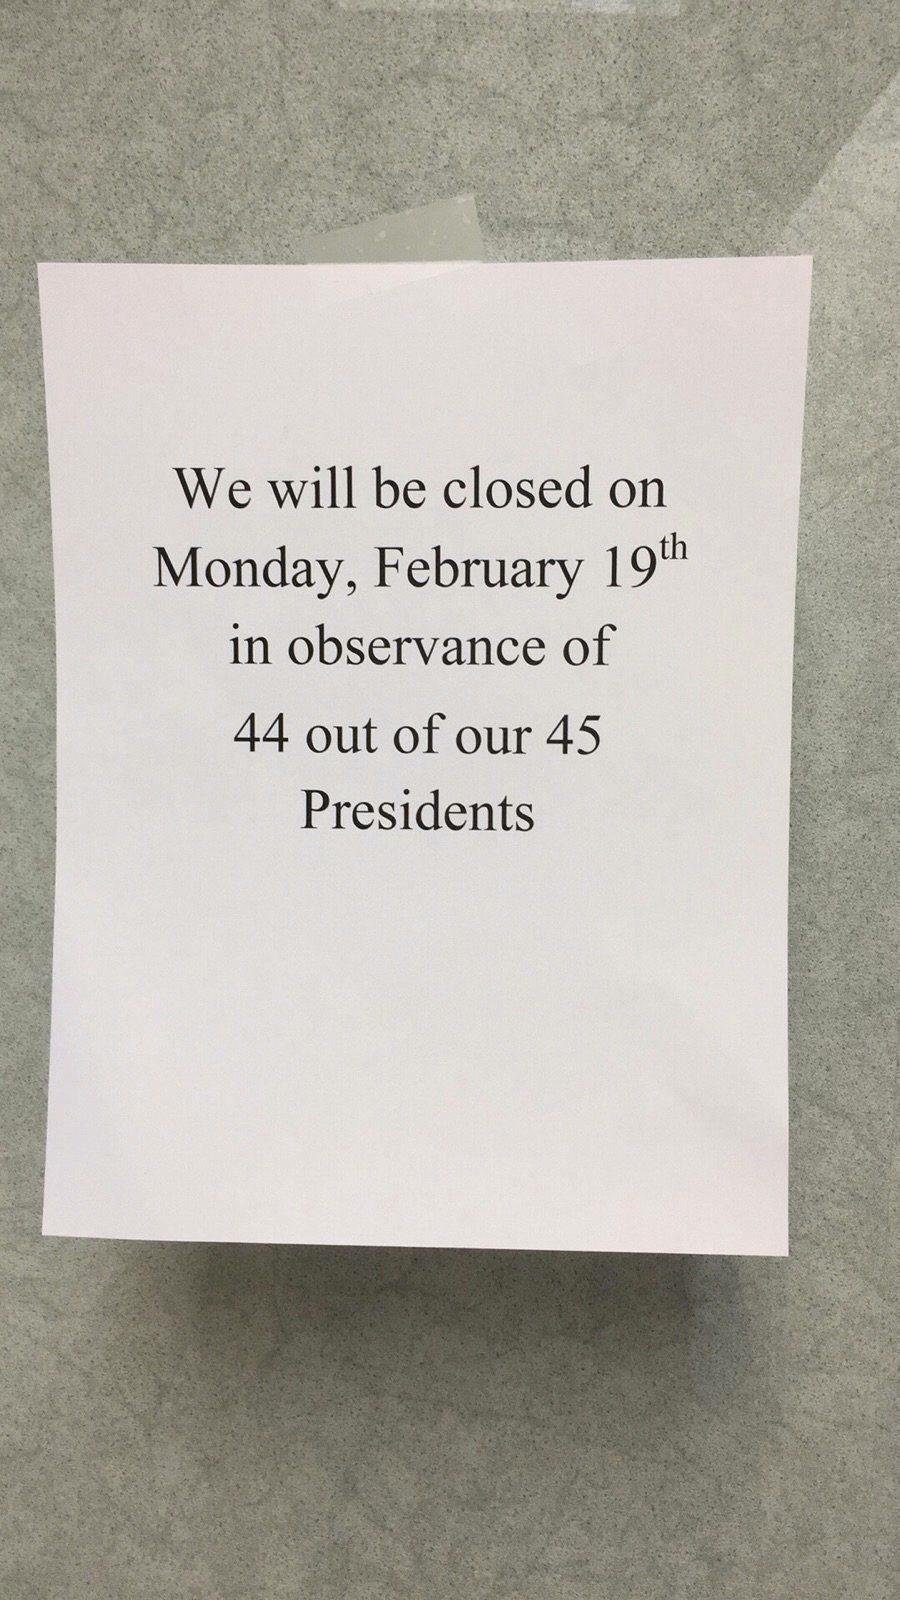 paper - We will be closed on Monday, February 19th in observance of 44 out of our 45 Presidents